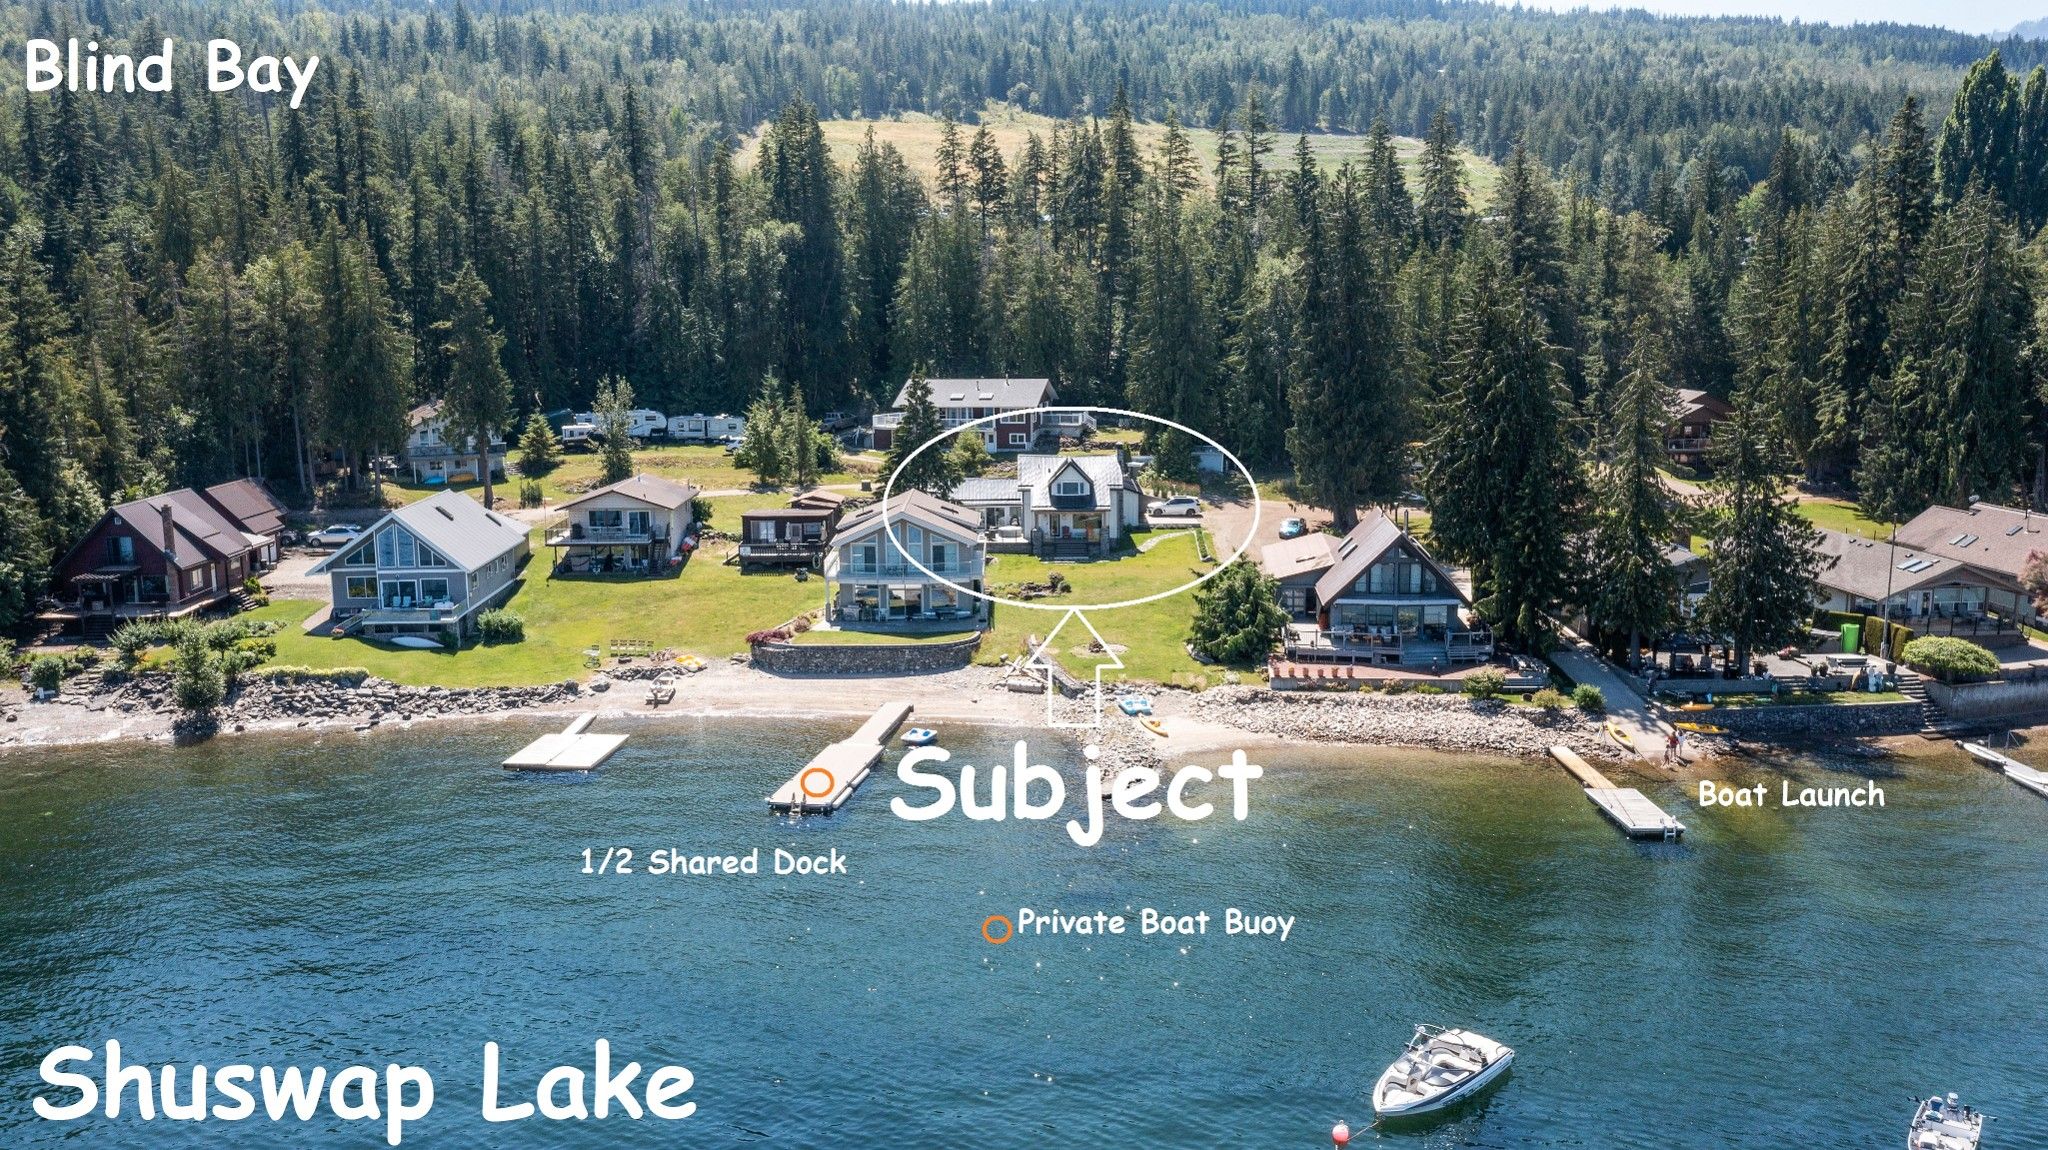 Main Photo: 185 1837 Archibald Road in Blind Bay: Shuswap Lake House for sale (SORRENTO)  : MLS®# 10259979